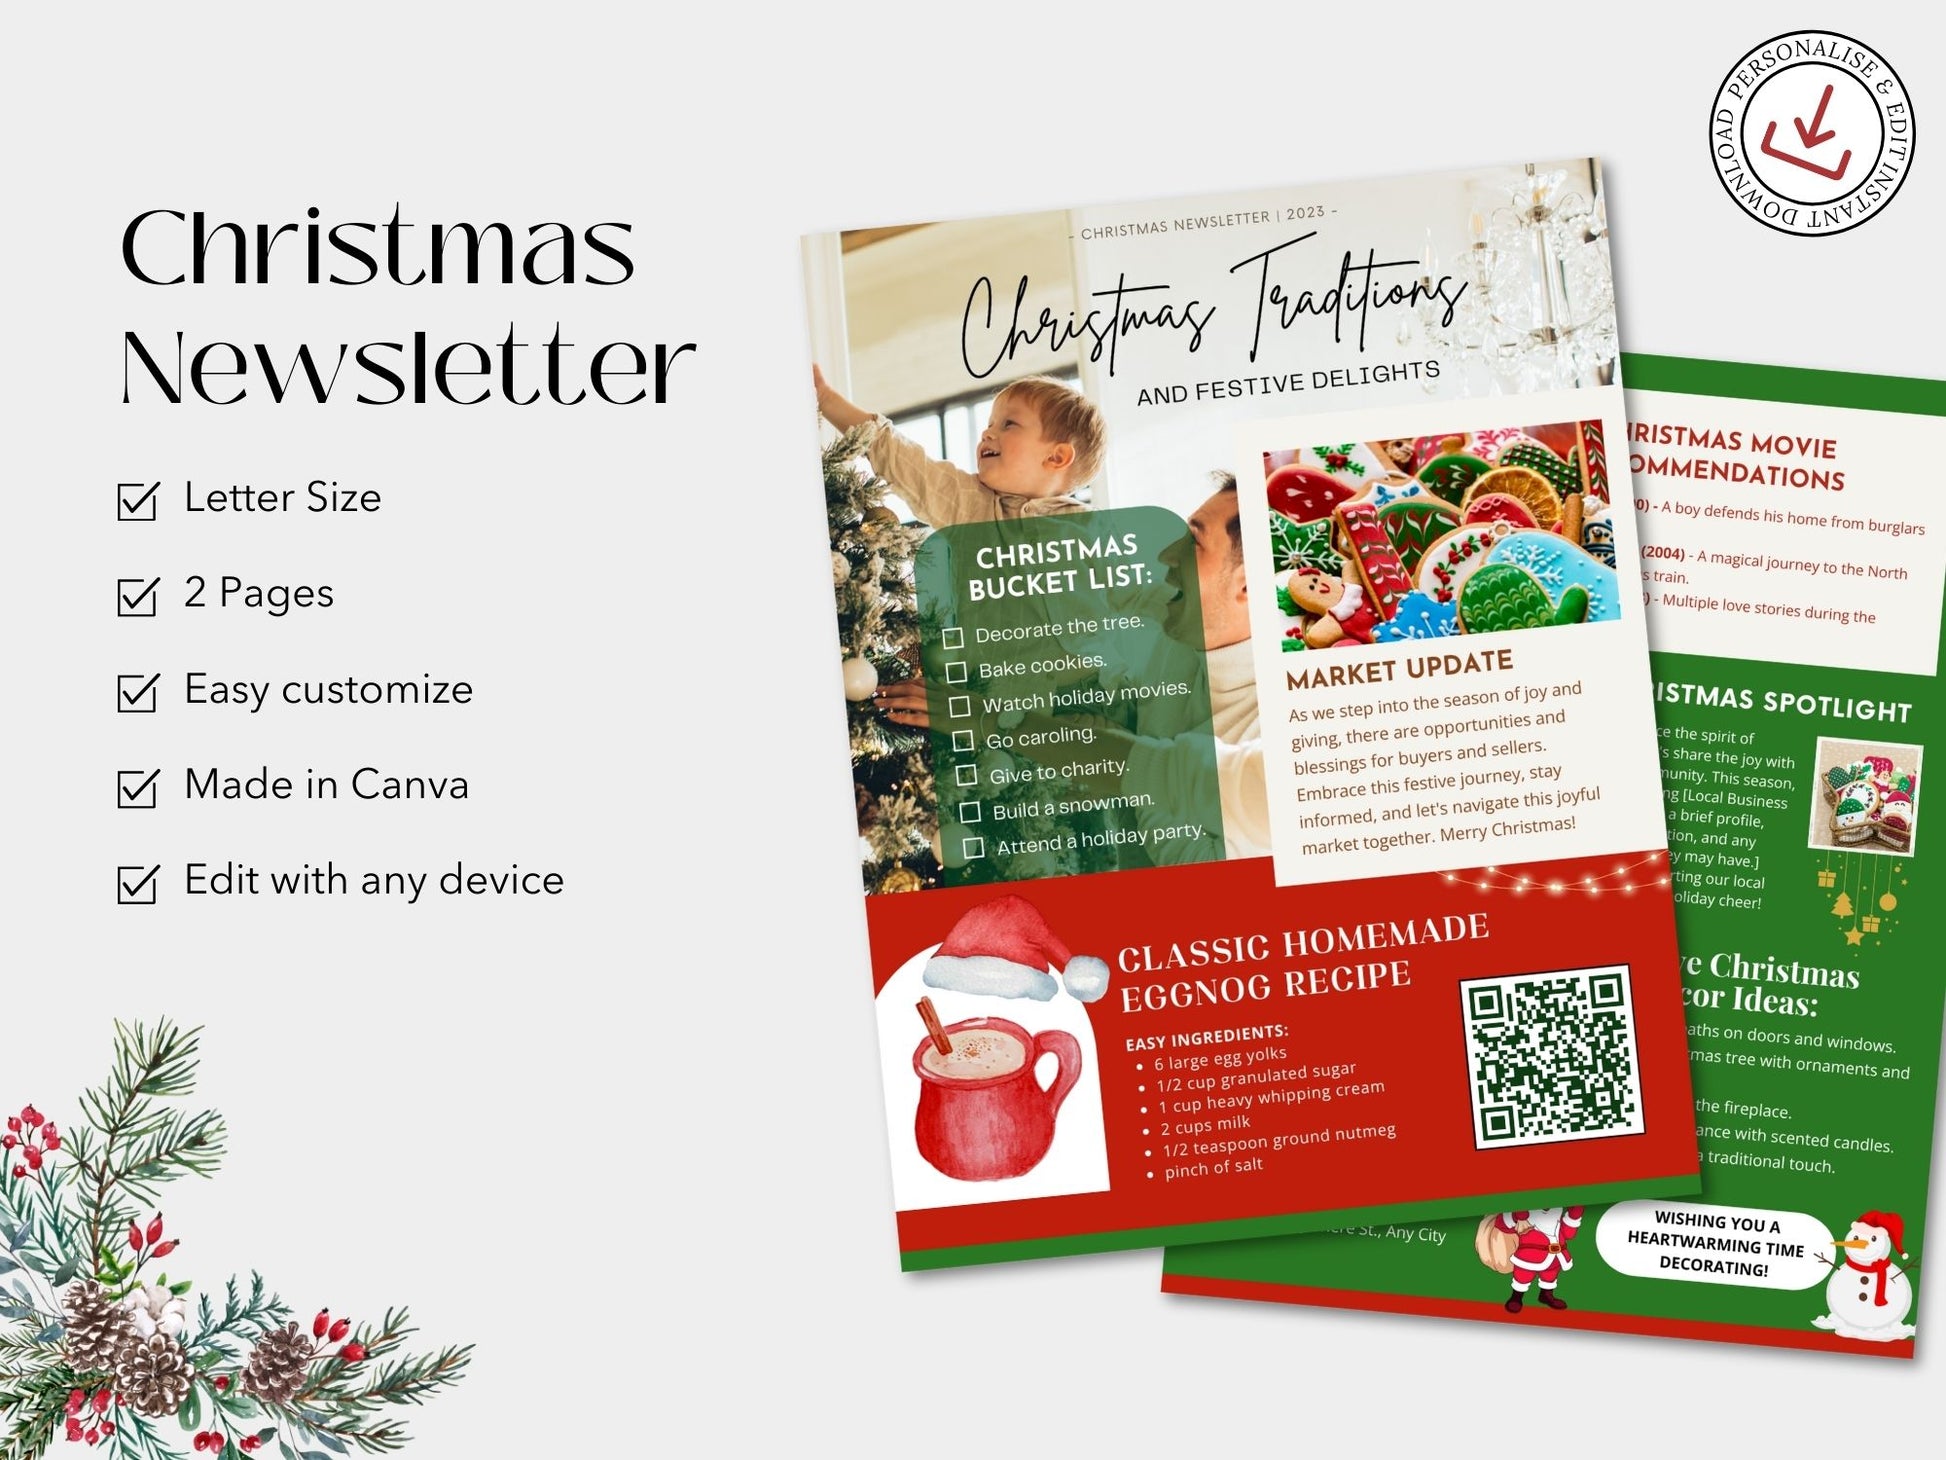 Real Estate Christmas Newsletter 2023 - Festive Client Communication for the Holiday Season